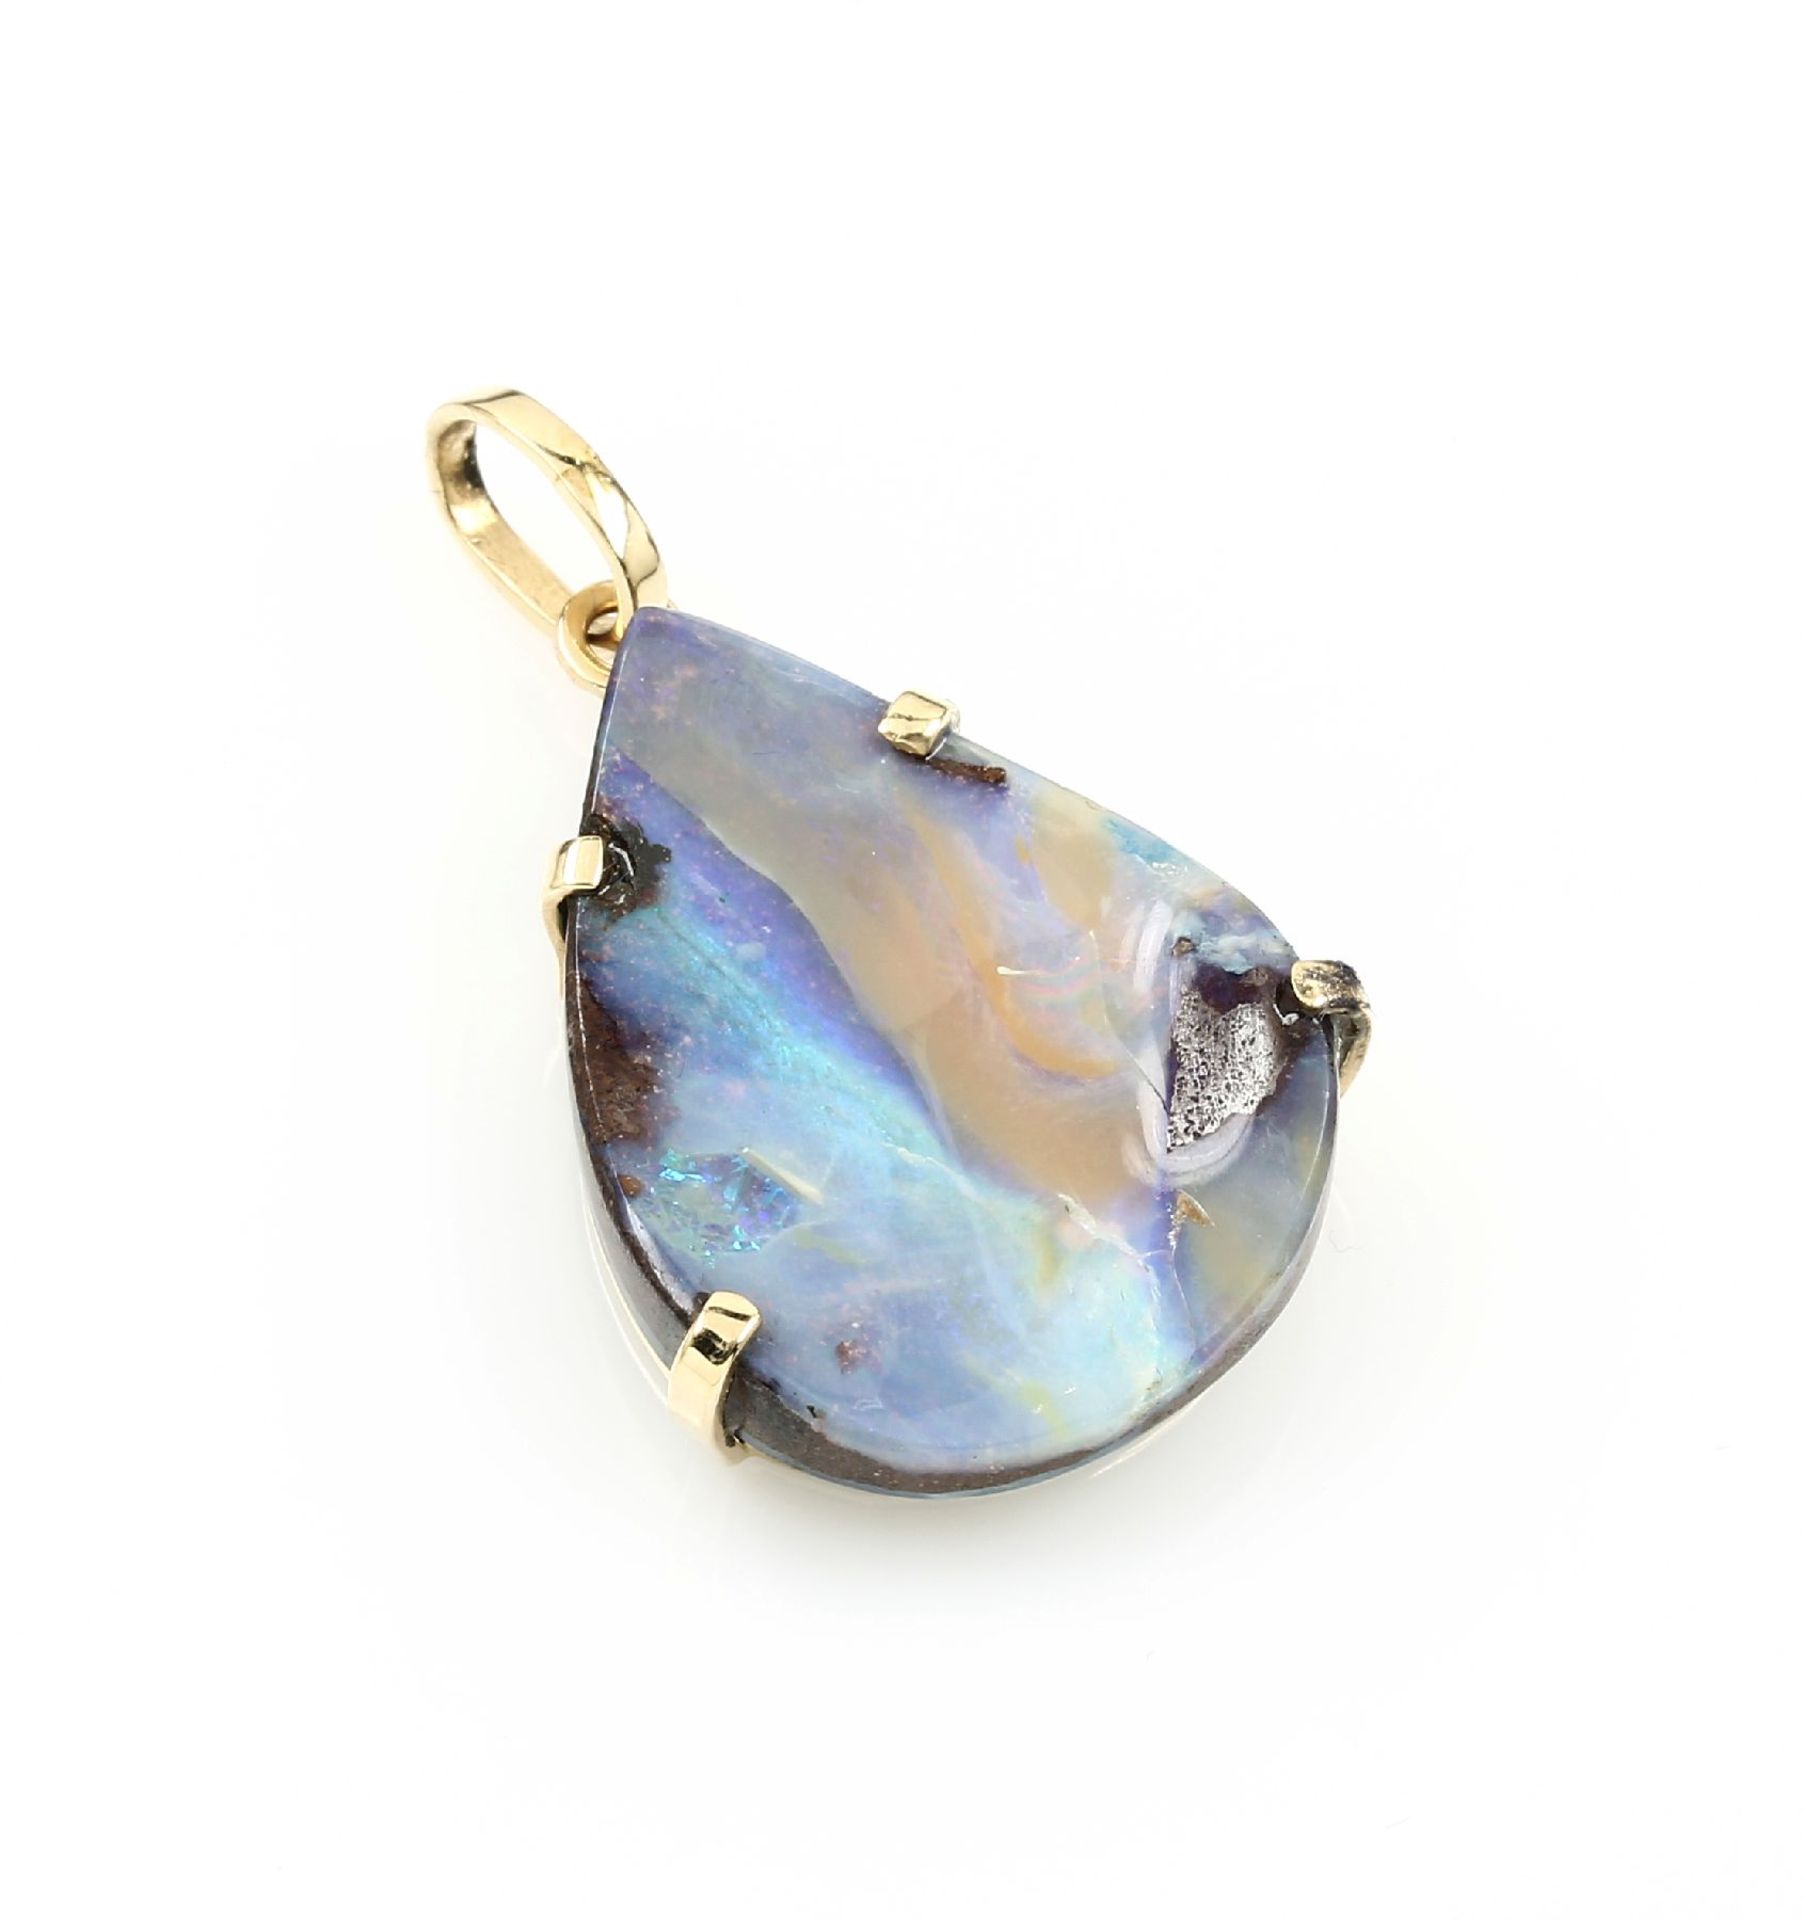 14 kt gold pendant with boulderopal , YG 585/000, opal pear approx. 14.00 ct, prong setting, l.